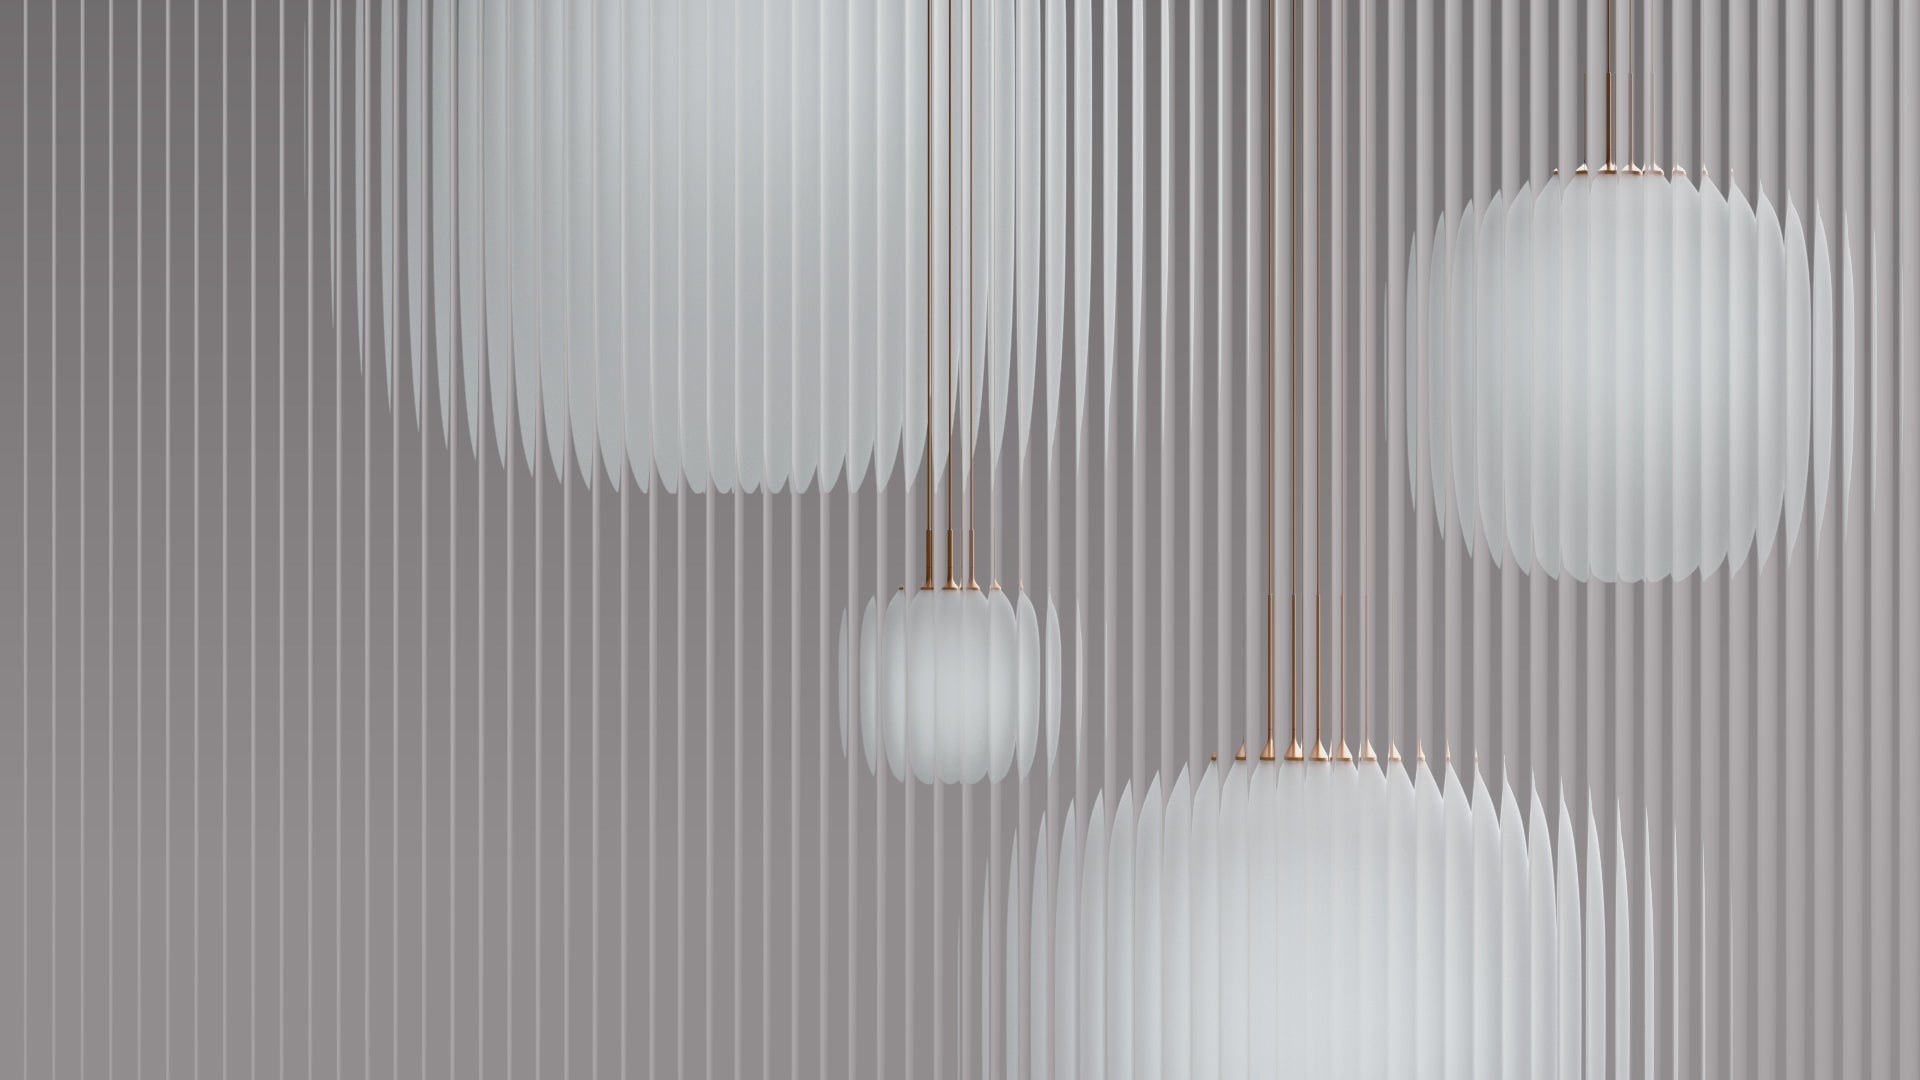 The Rime Pendant Lamp from Muuto in a product video.